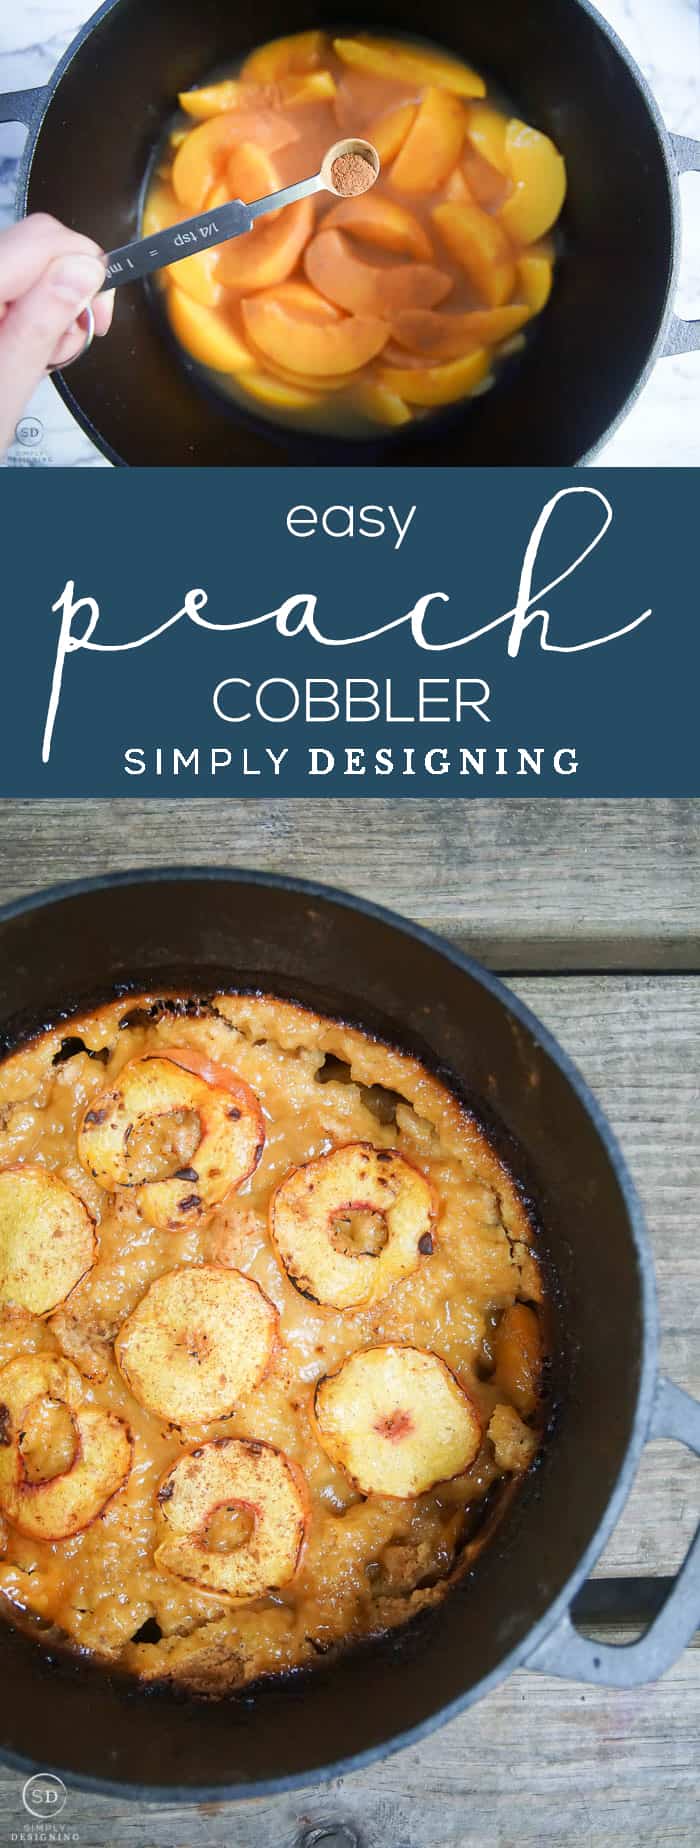 Easy Peach Cobbler - This easy peach cobbler recipe only requires 5 ingredients to make most of which you probably have on hand - It is delicious served warm with ice cream